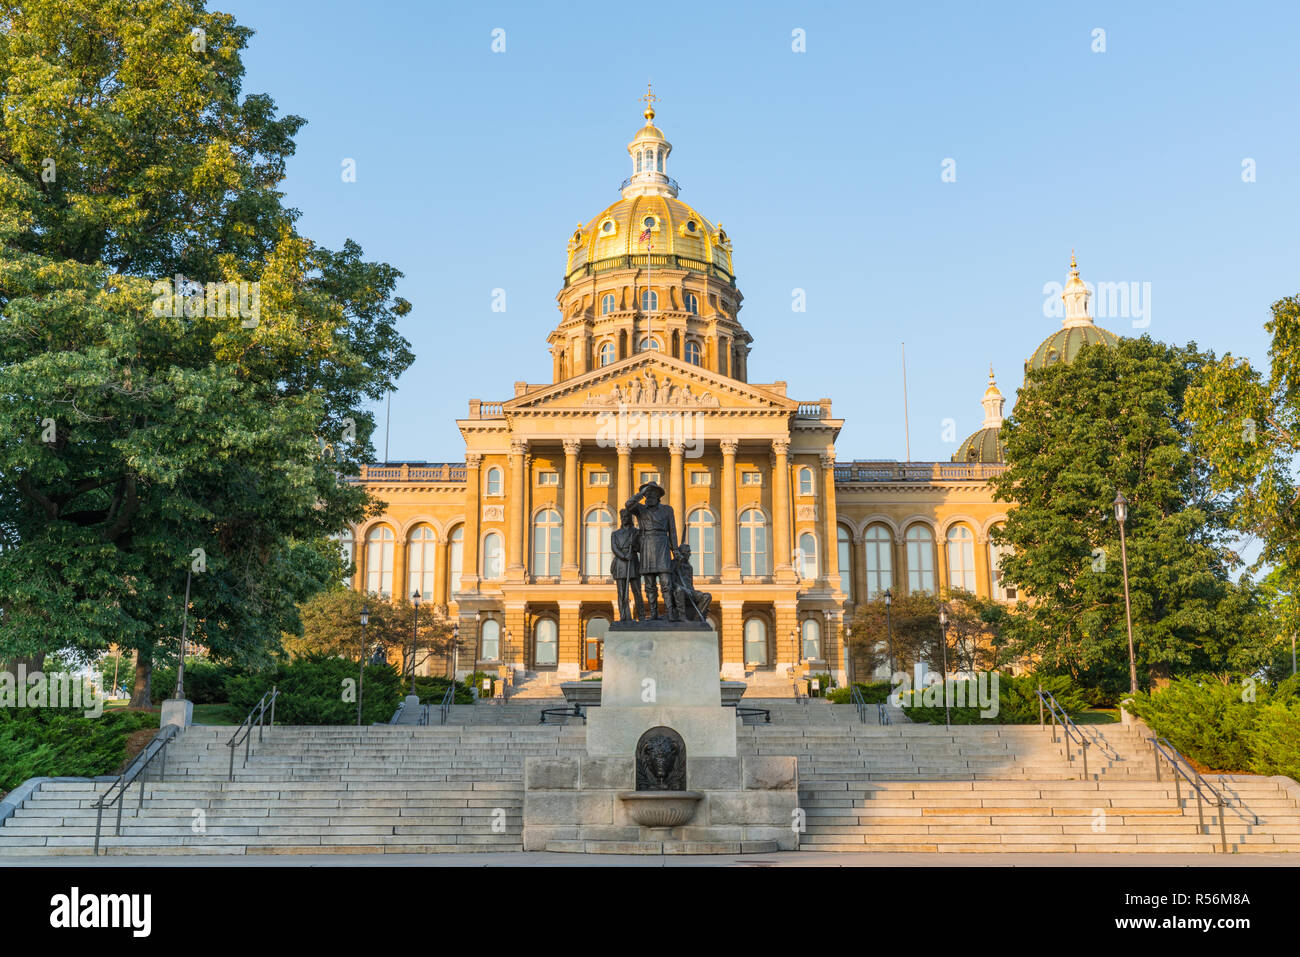 DES MOINES, IA - JULY 11, 2018: Facade of the Iowa State Capitol Building in Des Moines, Iowa Stock Photo